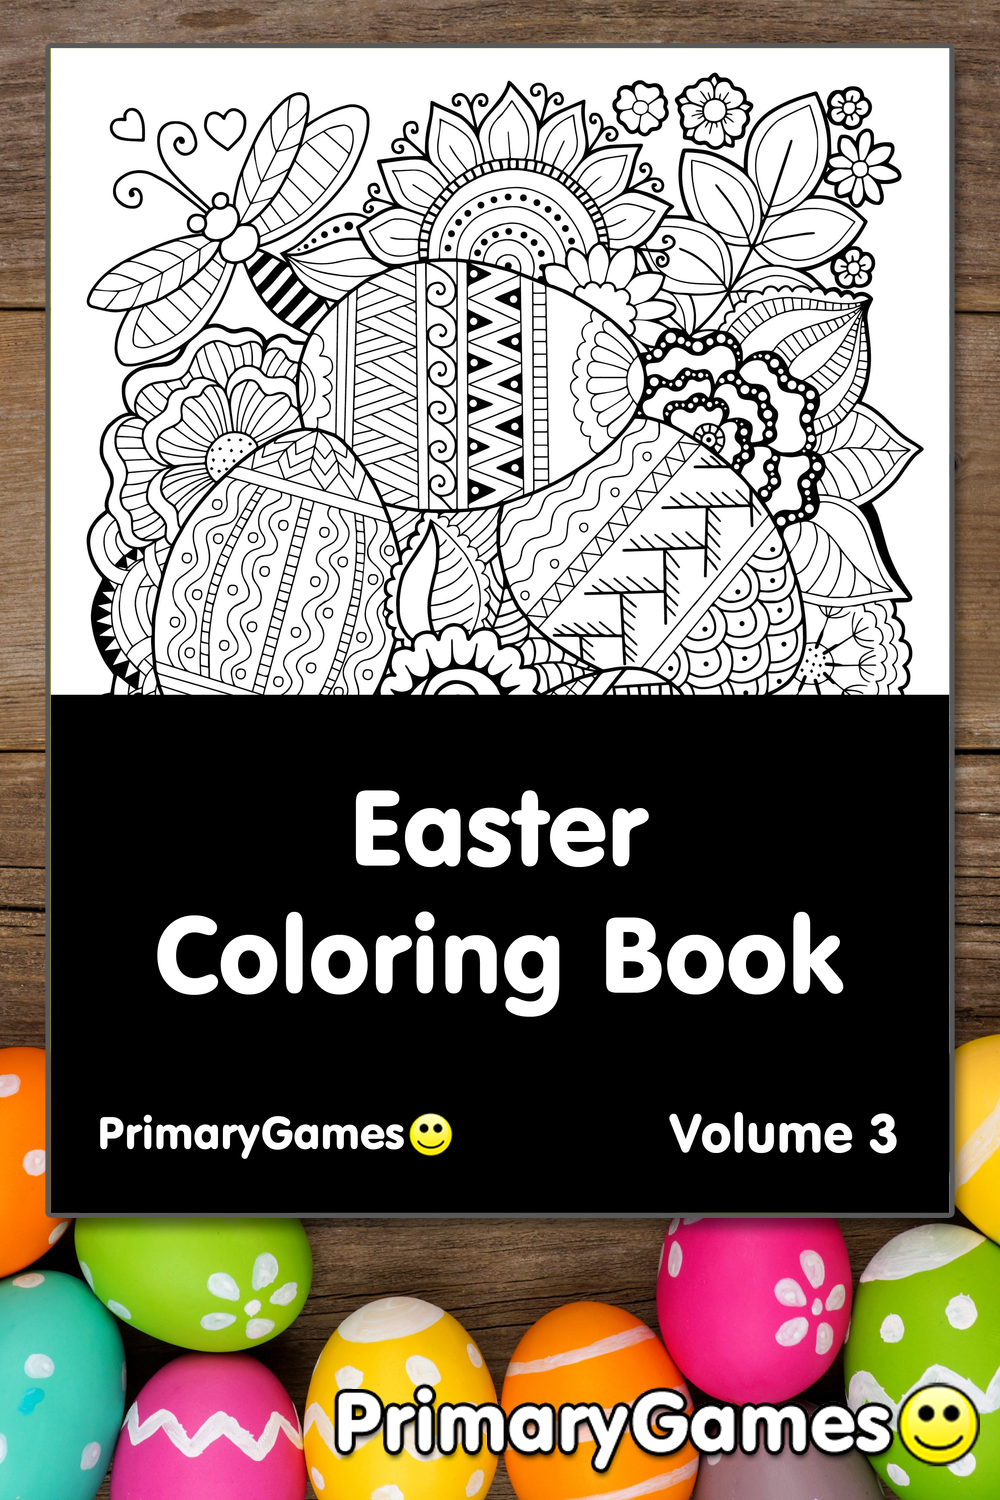 easter coloring ebook volume 3 free printable pdf from primarygames